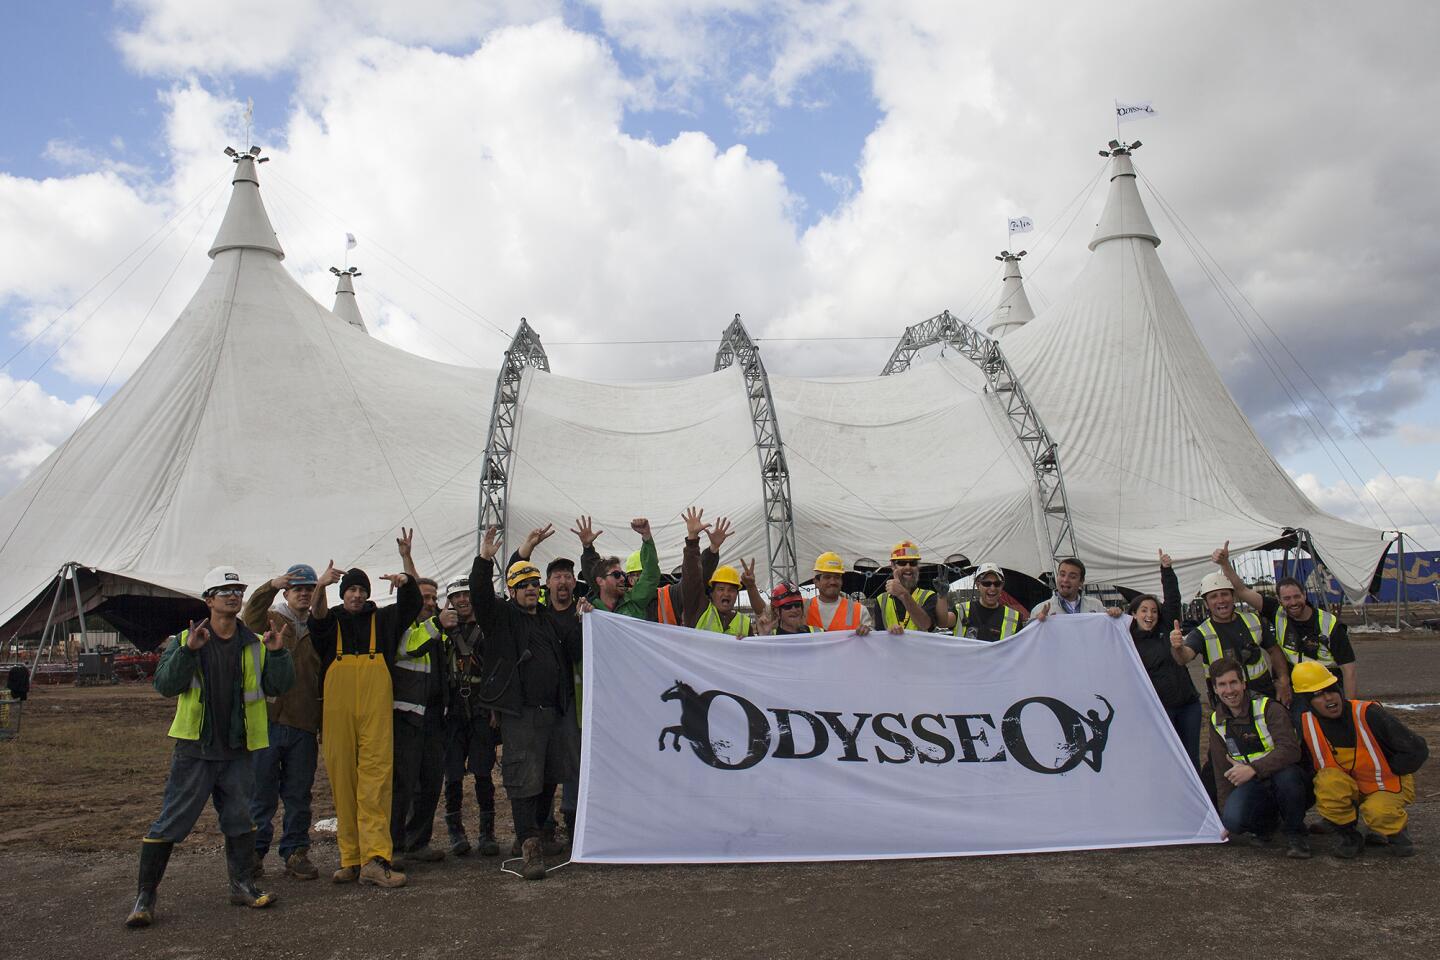 "Odysseo" tent goes up in Irvine